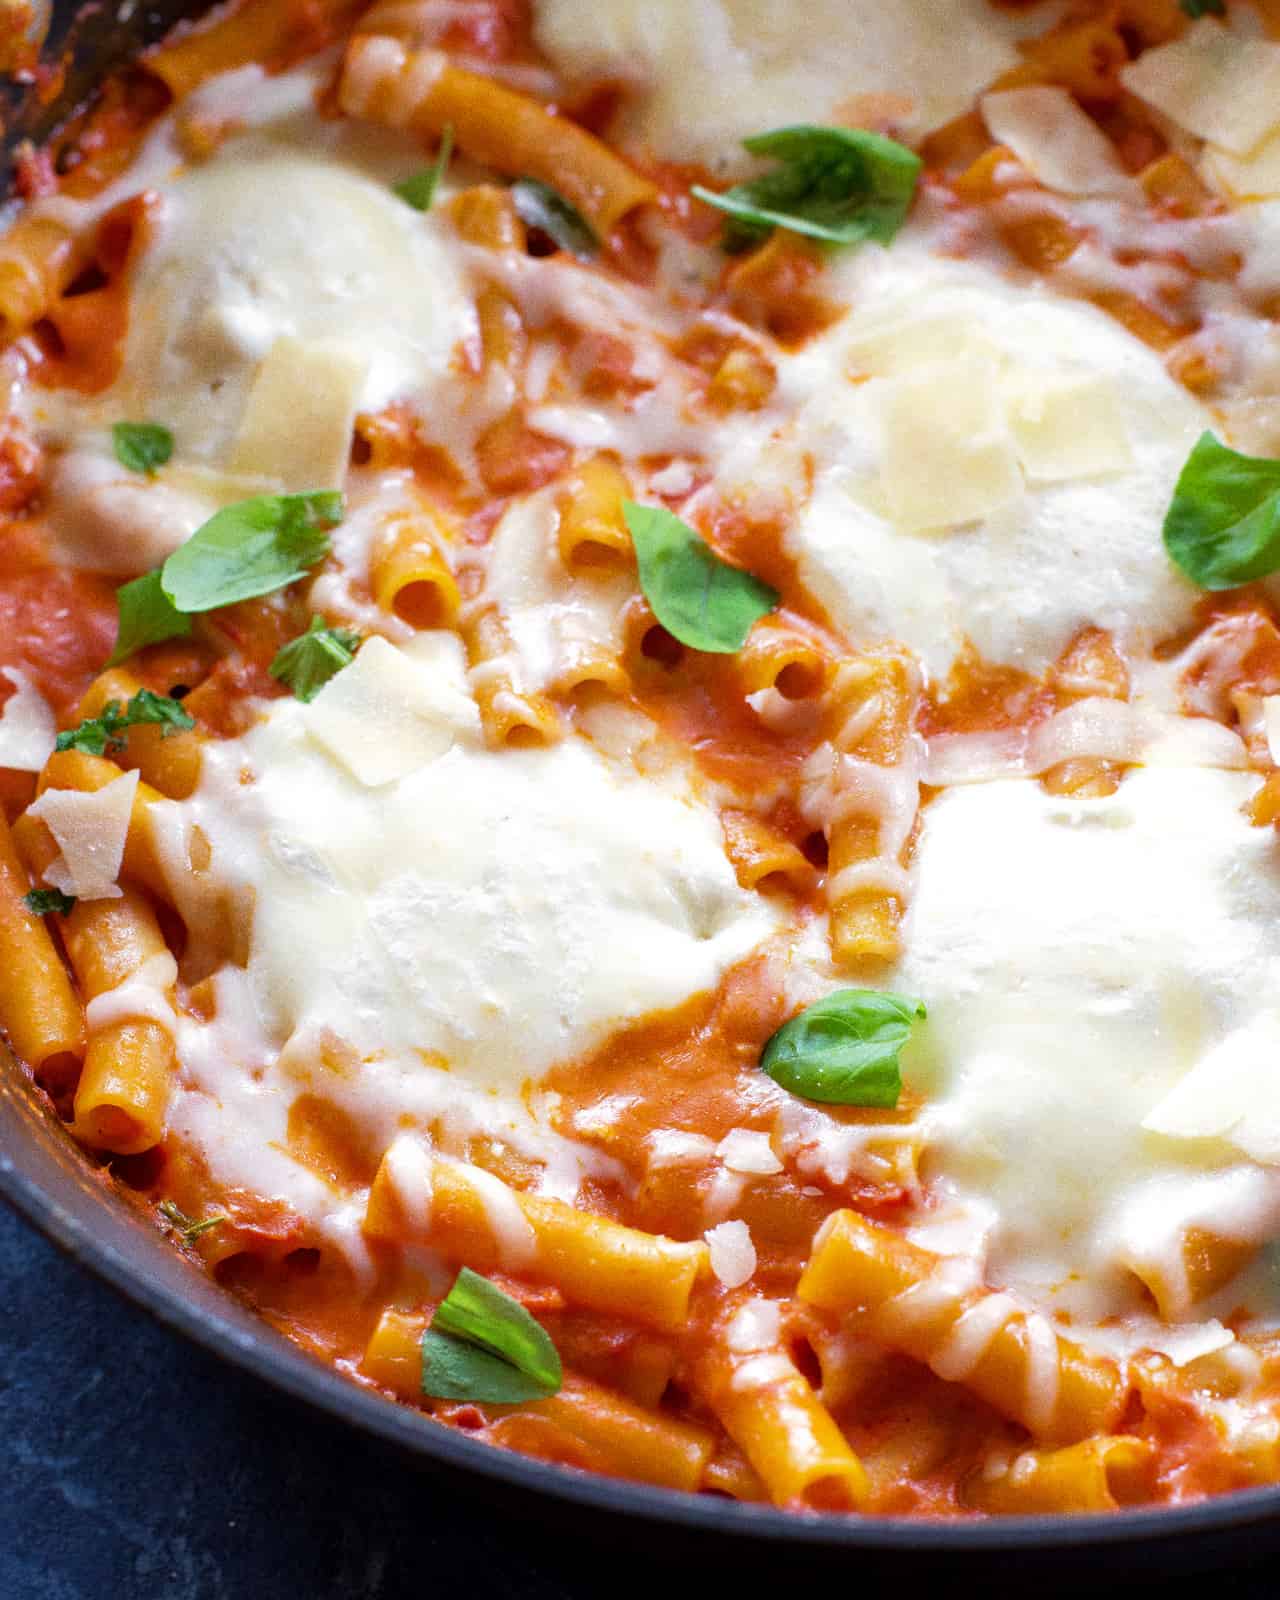 https://www.the-girl-who-ate-everything.com/wp-content/uploads/2013/08/skillet-baked-ziti-001.jpg